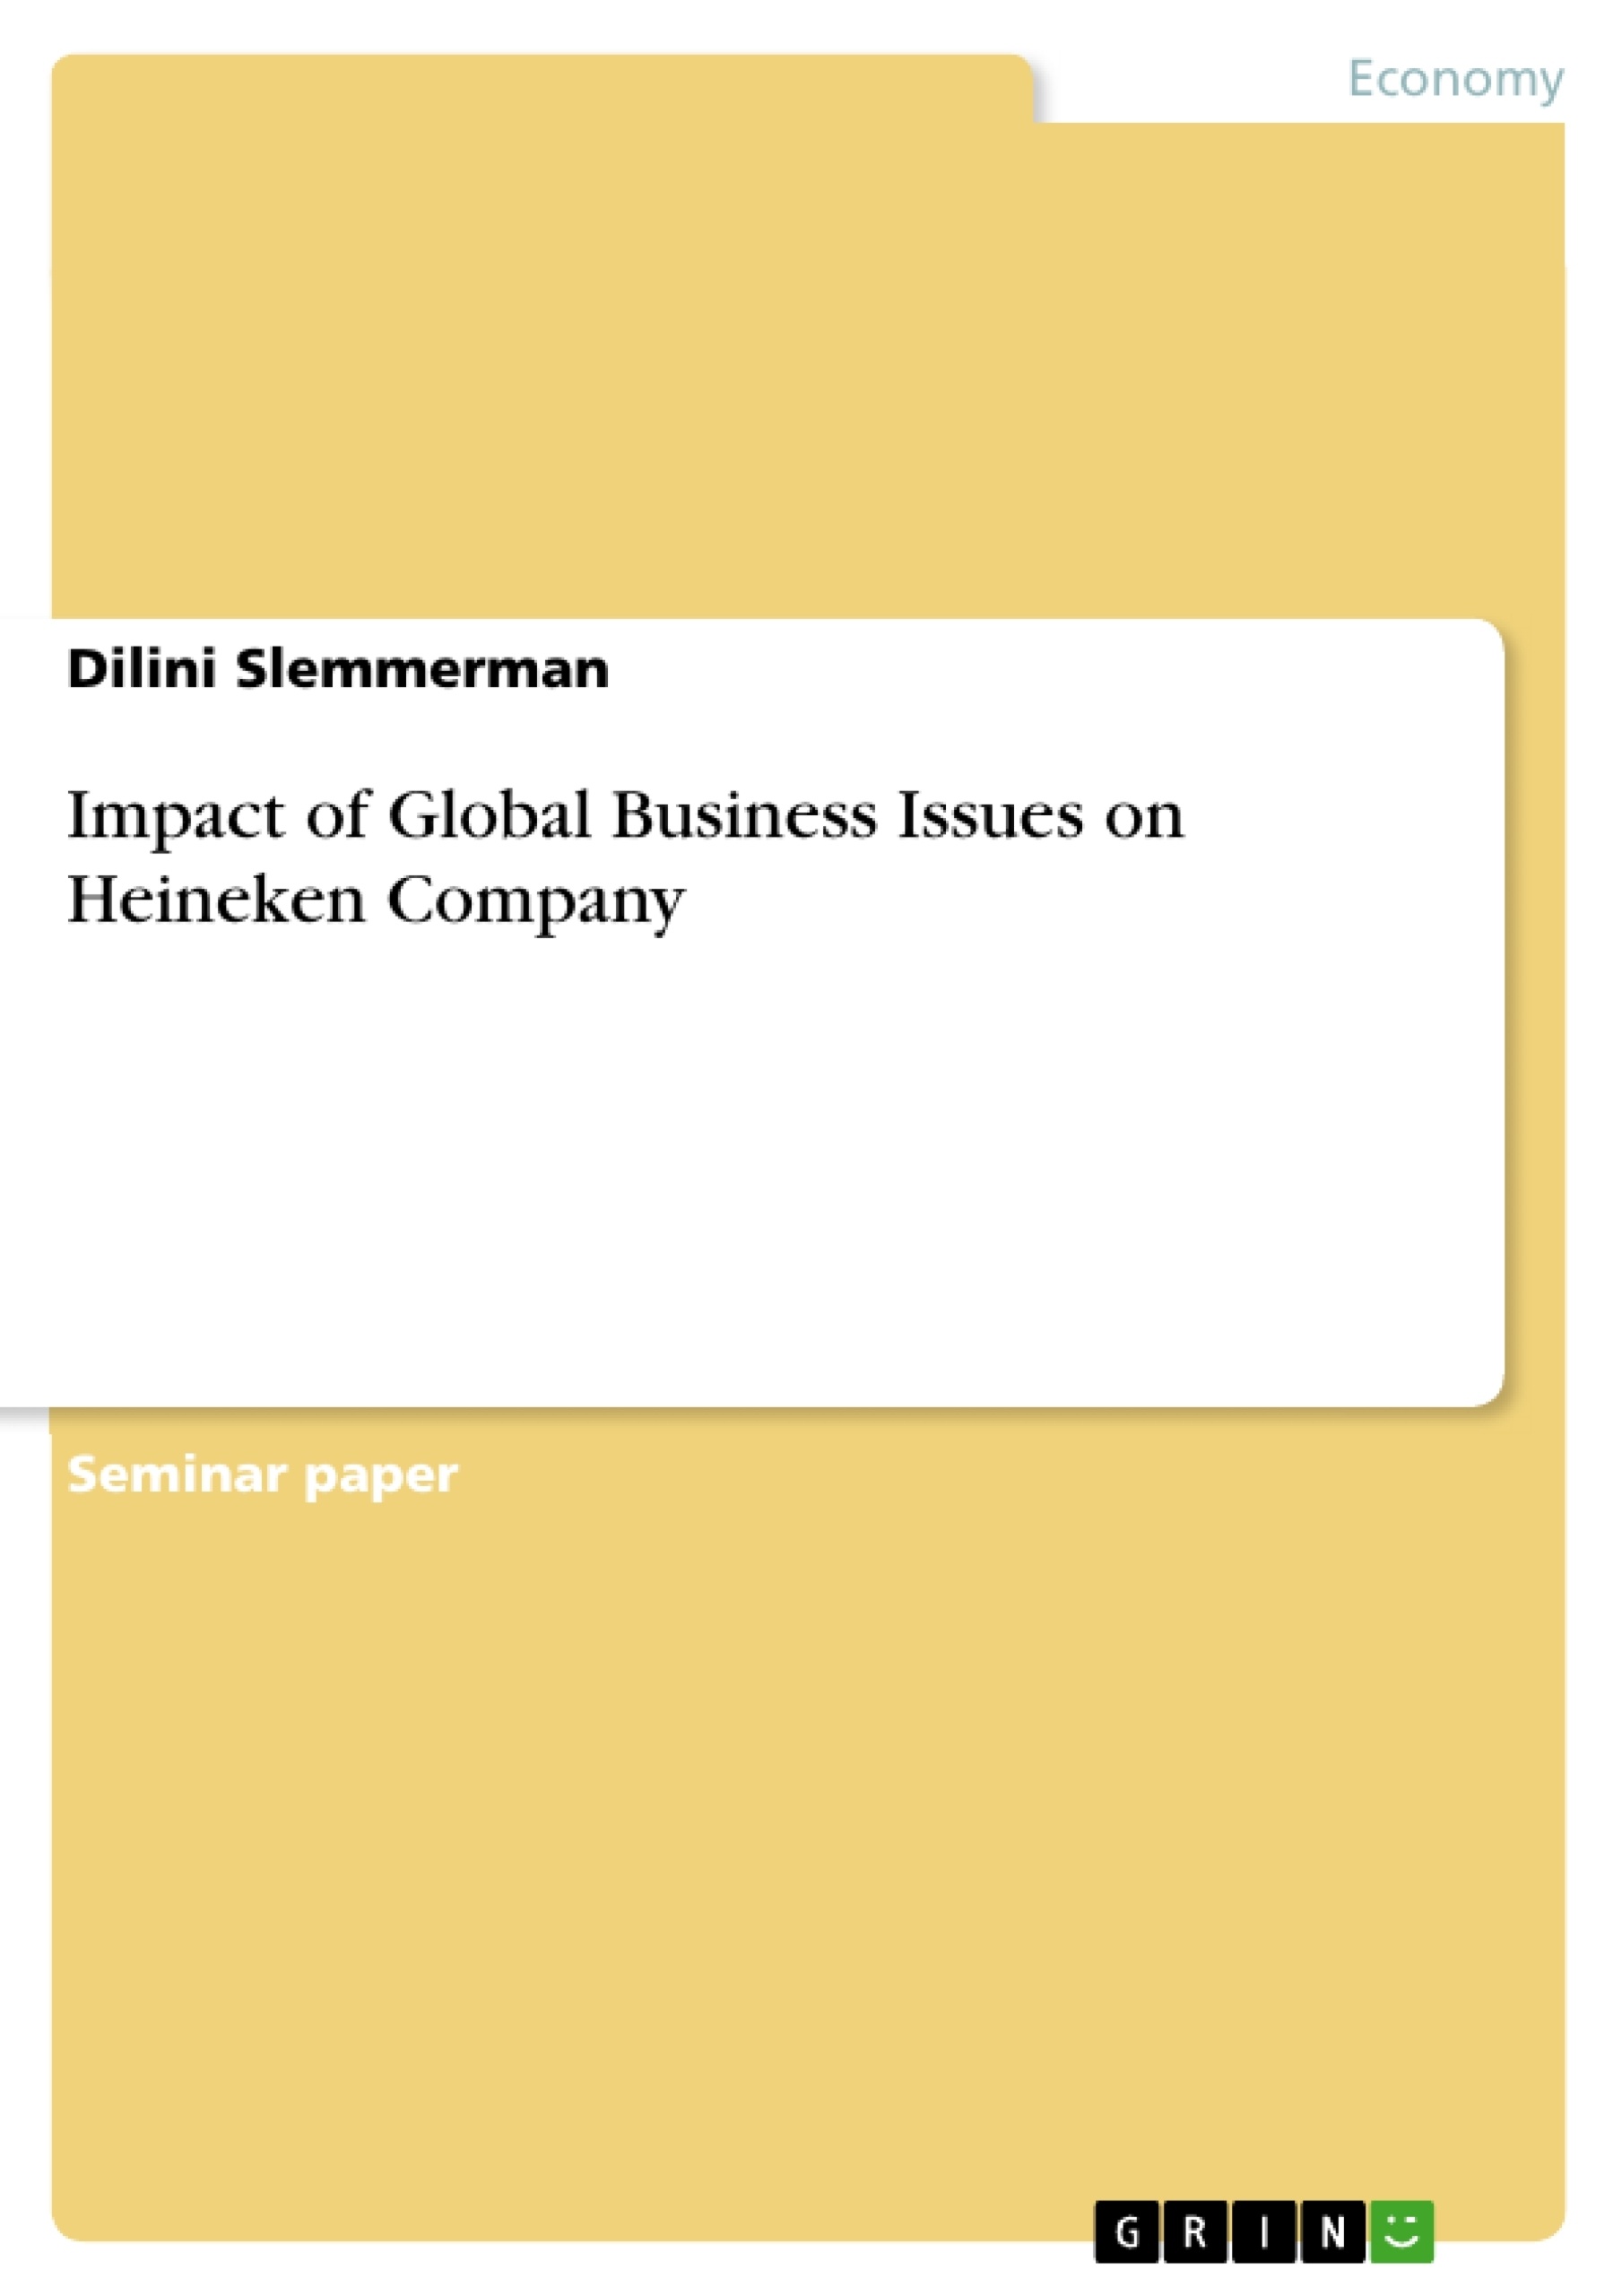 Title: Impact of Global Business Issues on Heineken Company